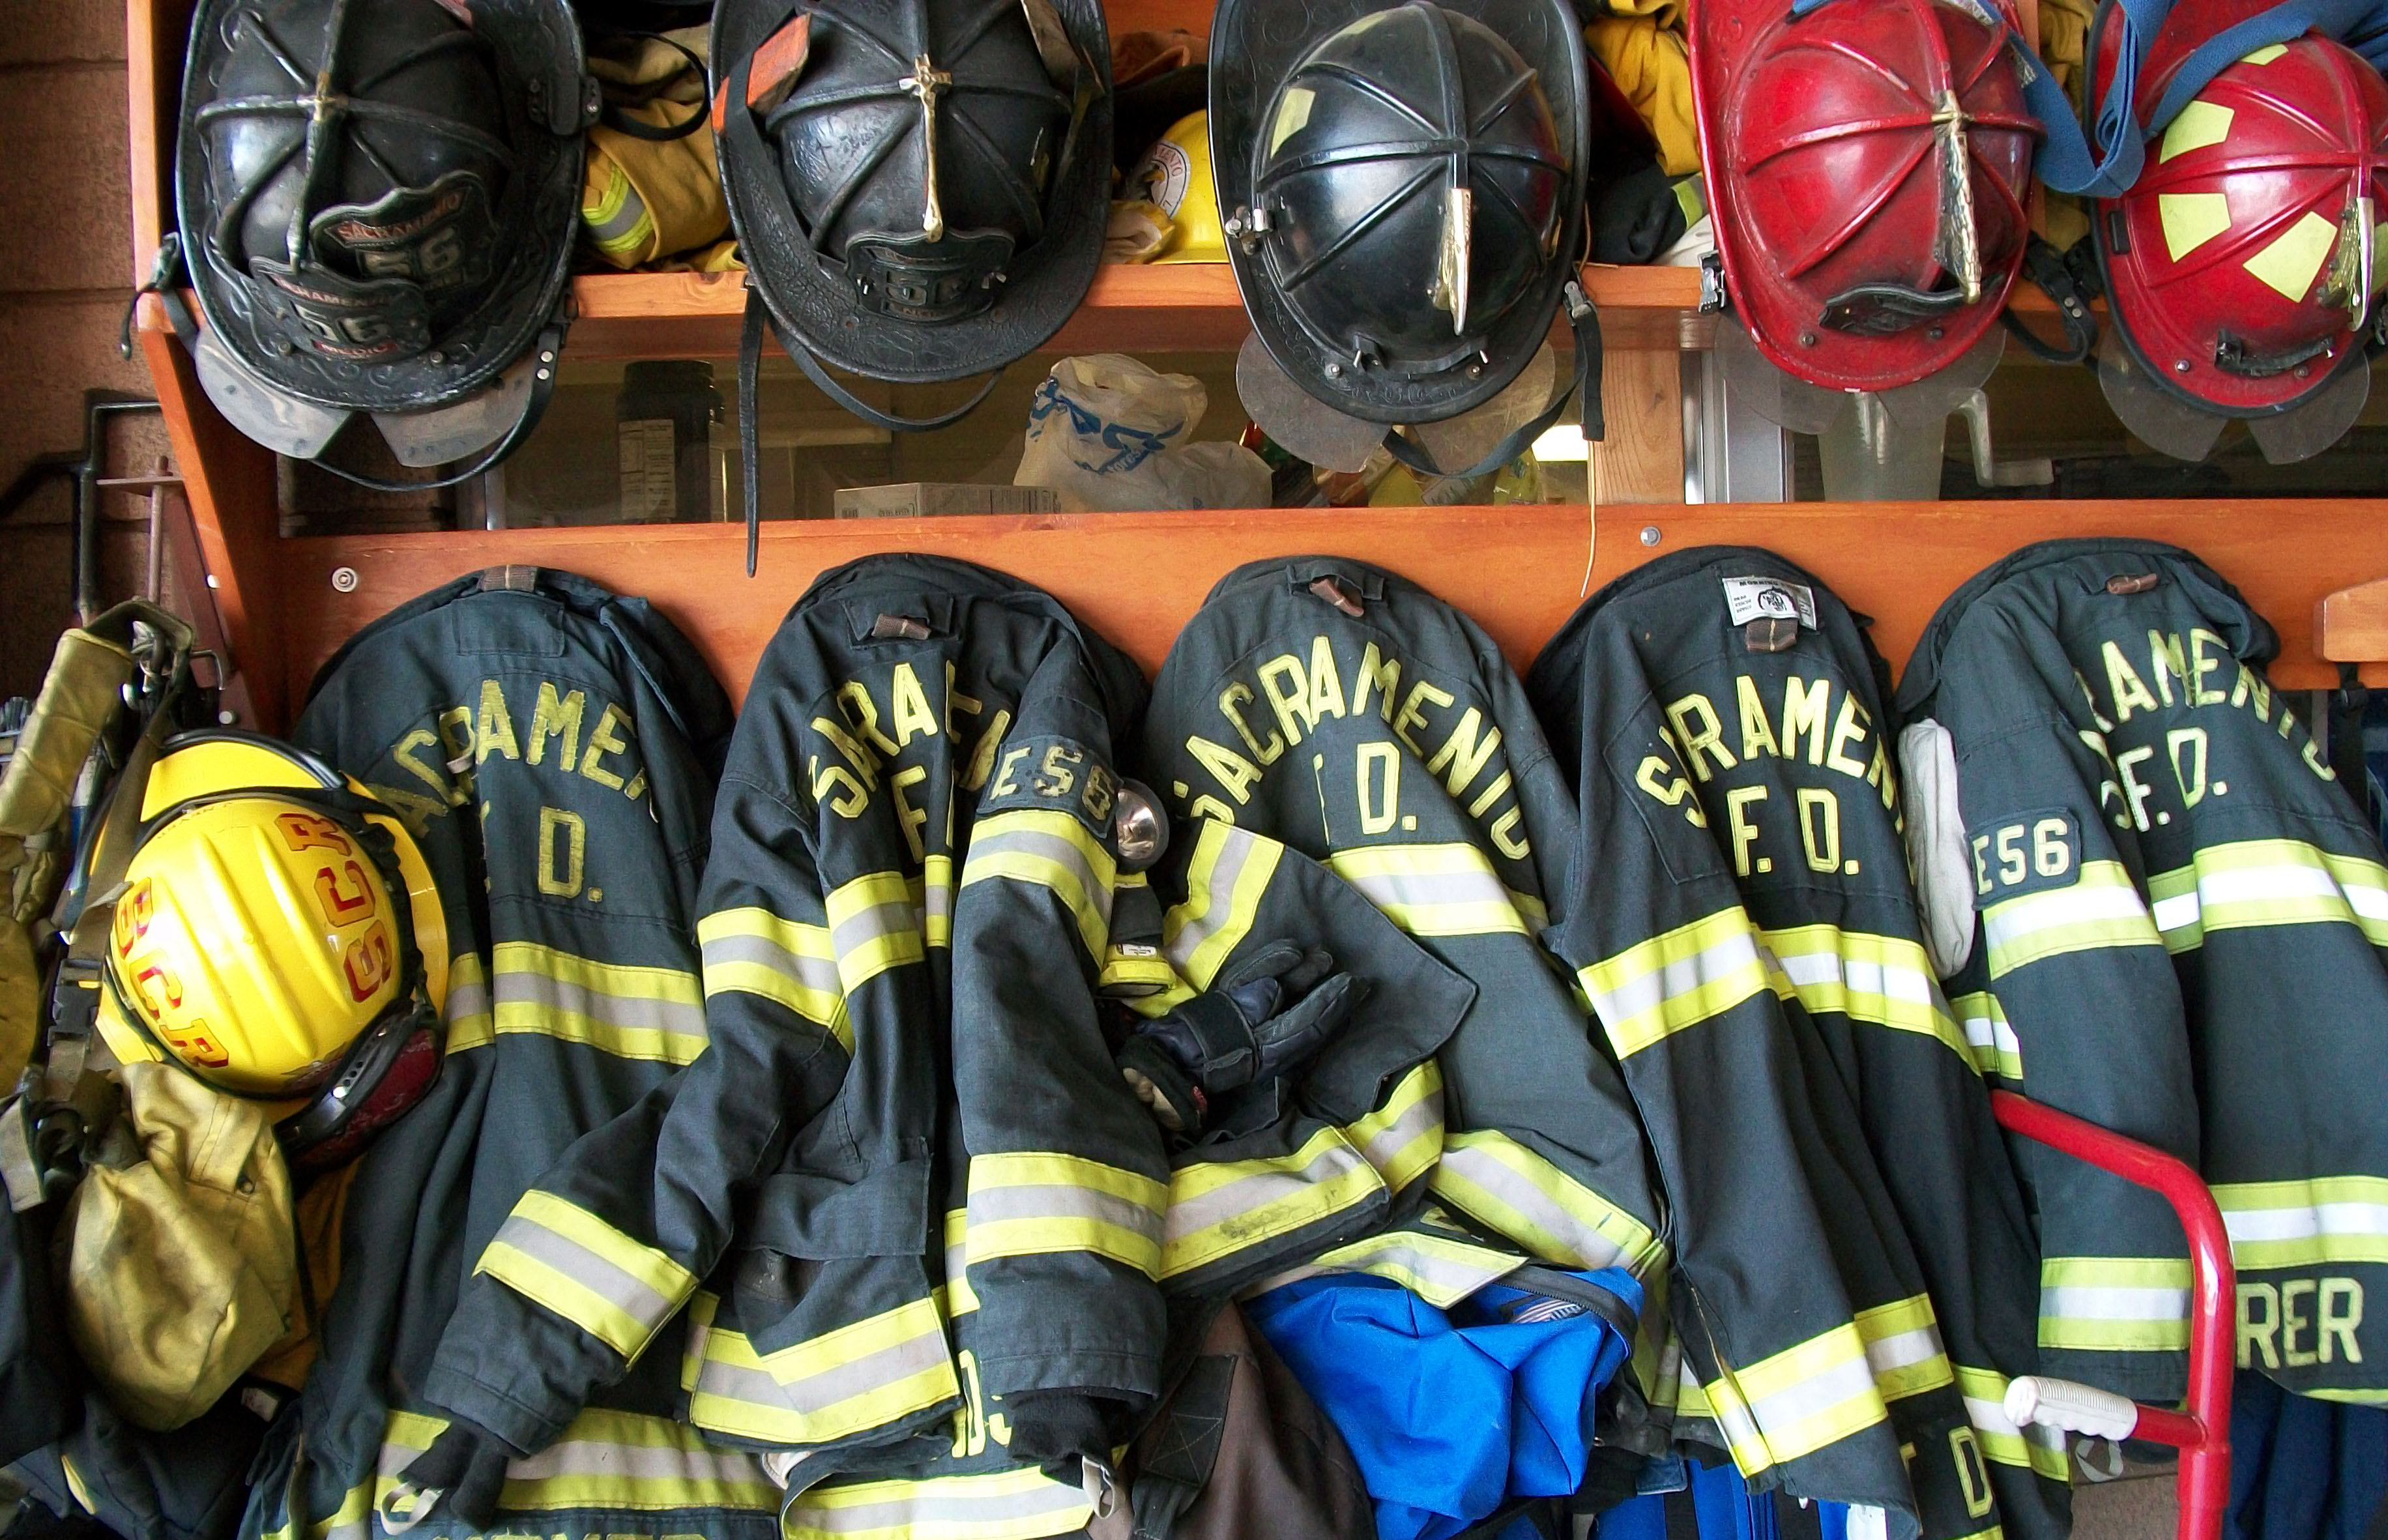 Black firefighter jackets and helmets hanging